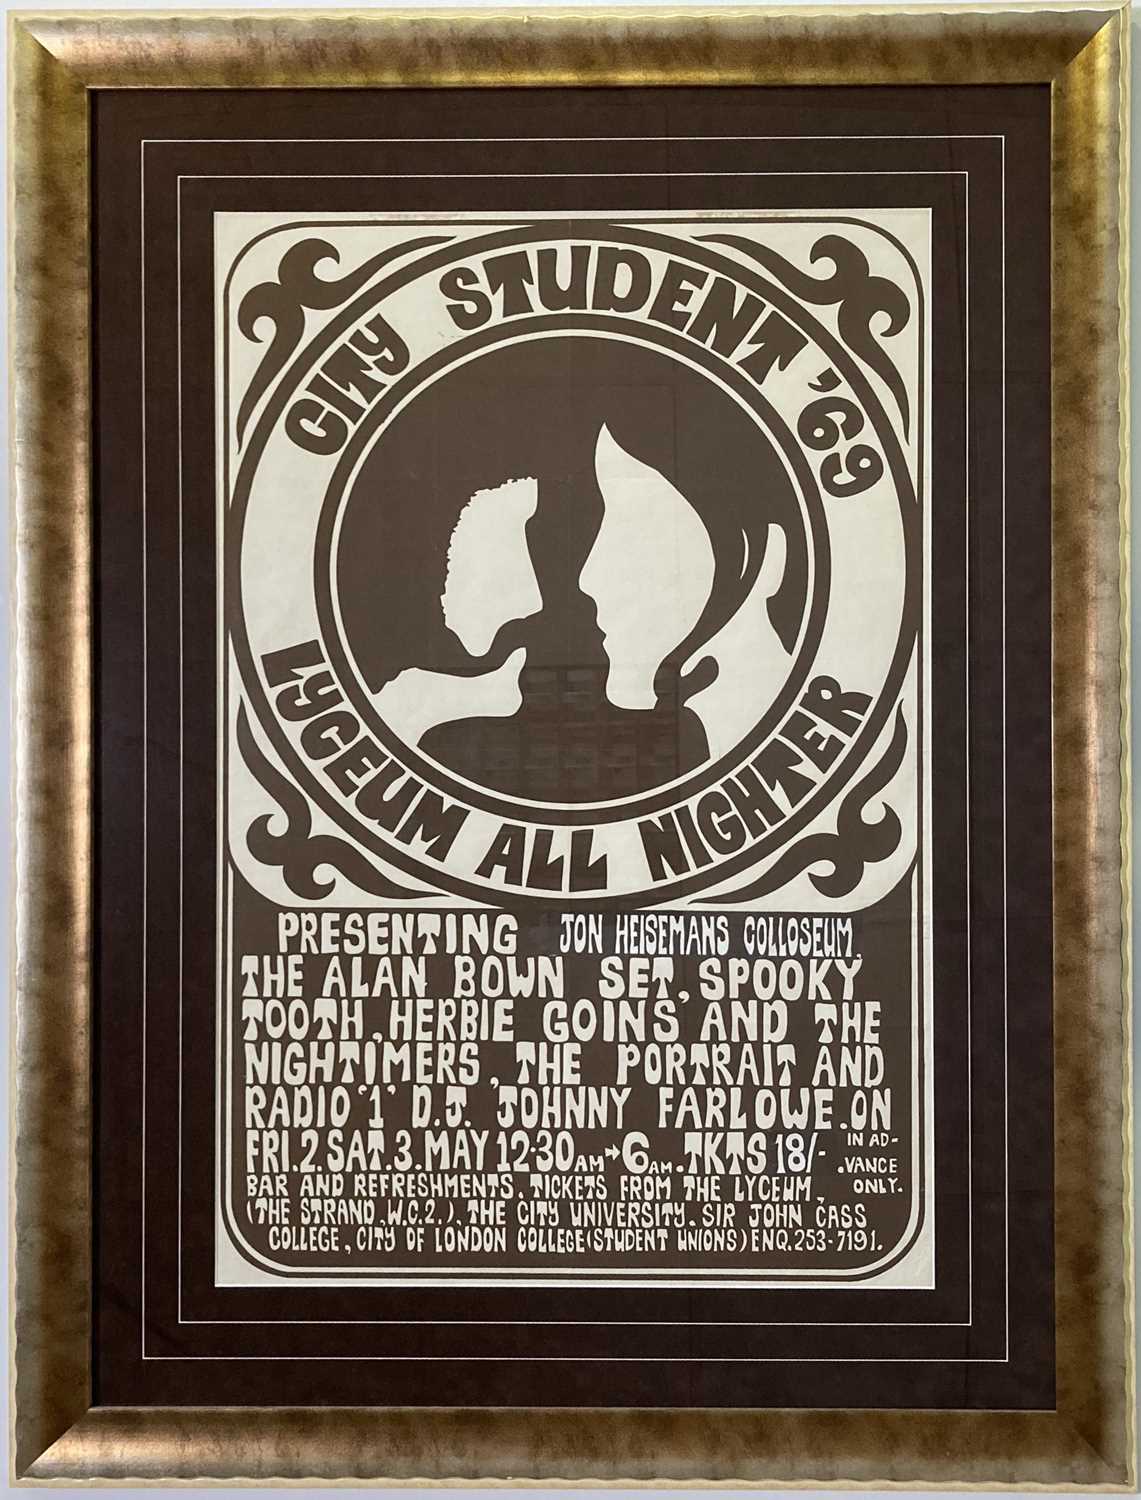 Lot 98 - 1969 'ALL NIGHTER' POSTER - ALAN BOWN / SPOOKY TOOTH ETC.